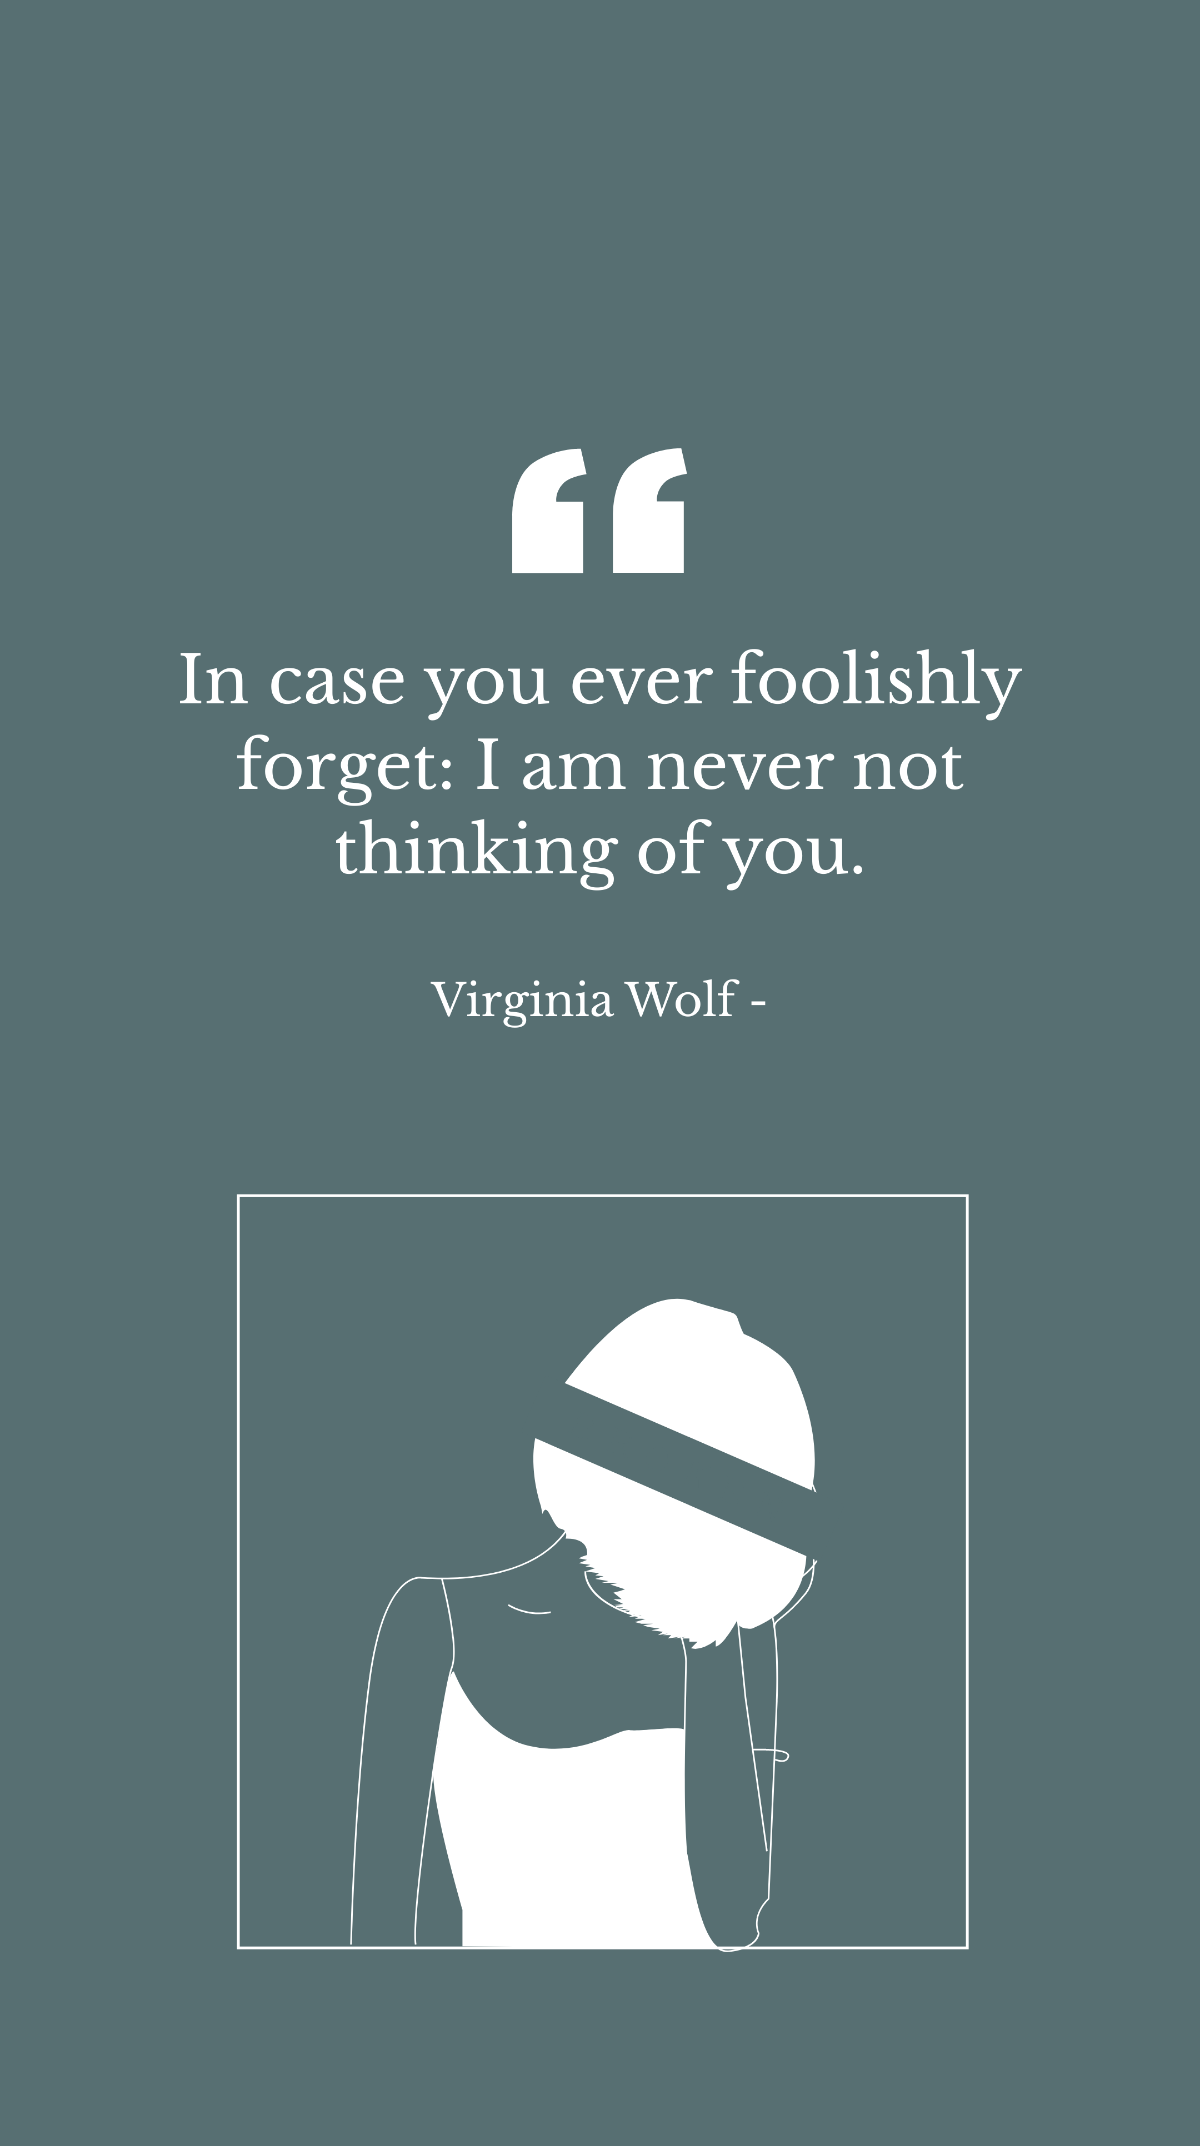 Virginia Wolf - In case you ever foolishly forget: I am never not thinking of you.